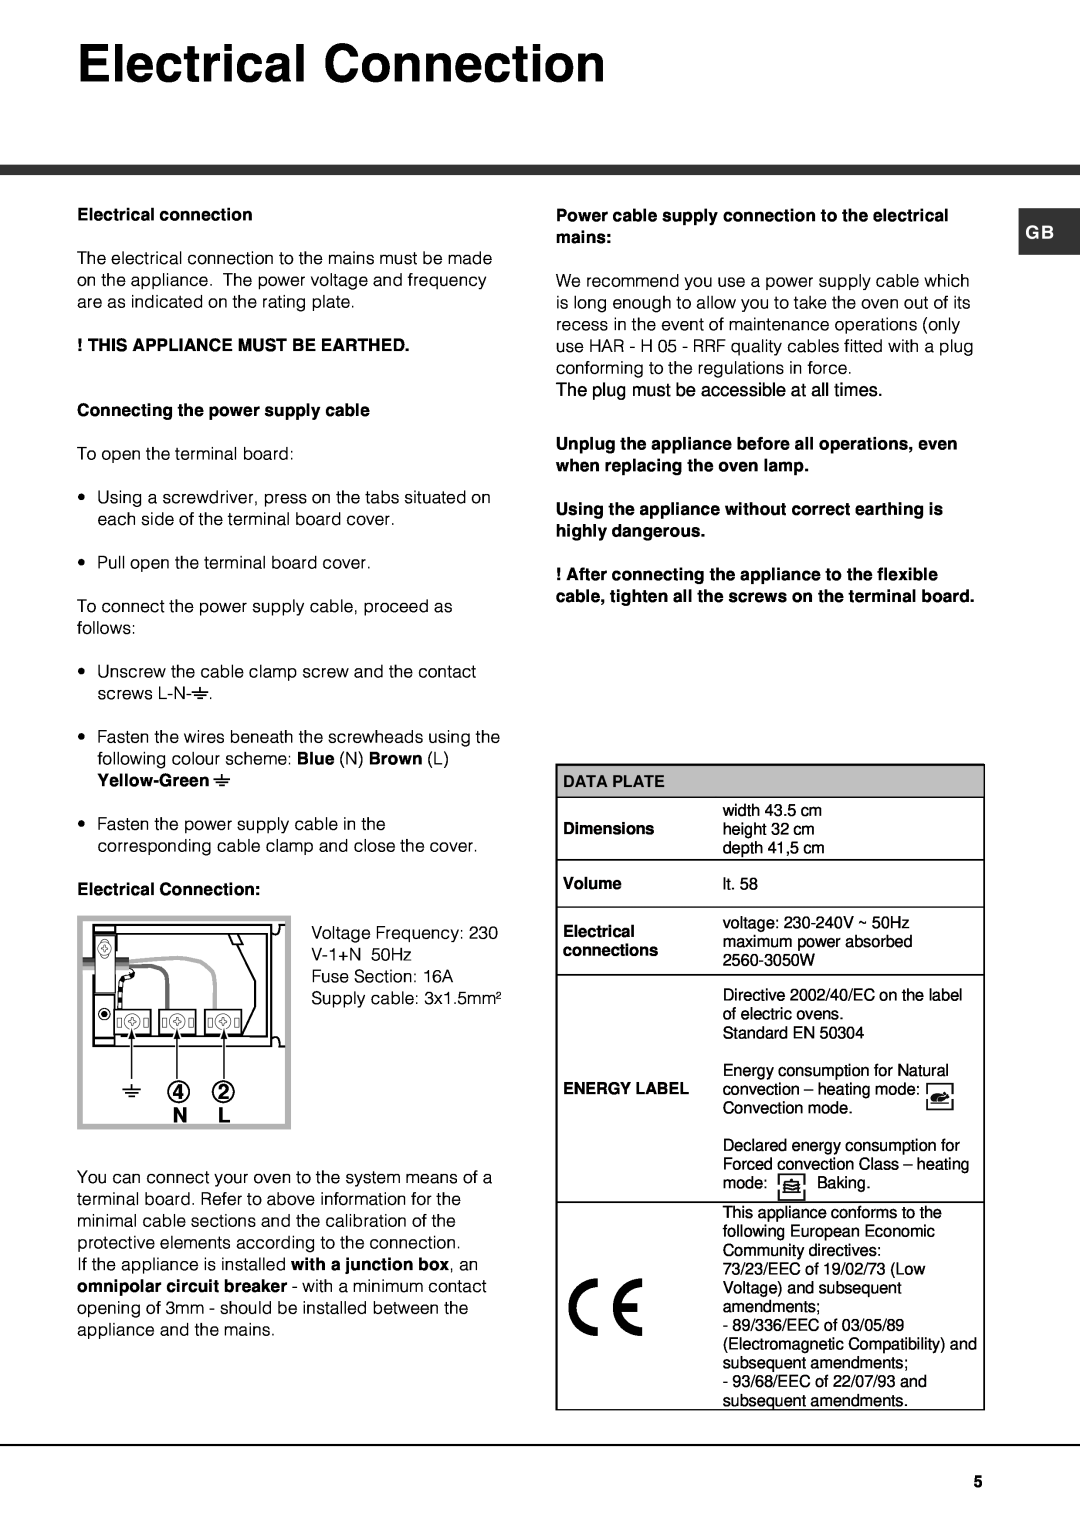 Hotpoint SE100PX manual Electrical Connection, 4 2 N L 